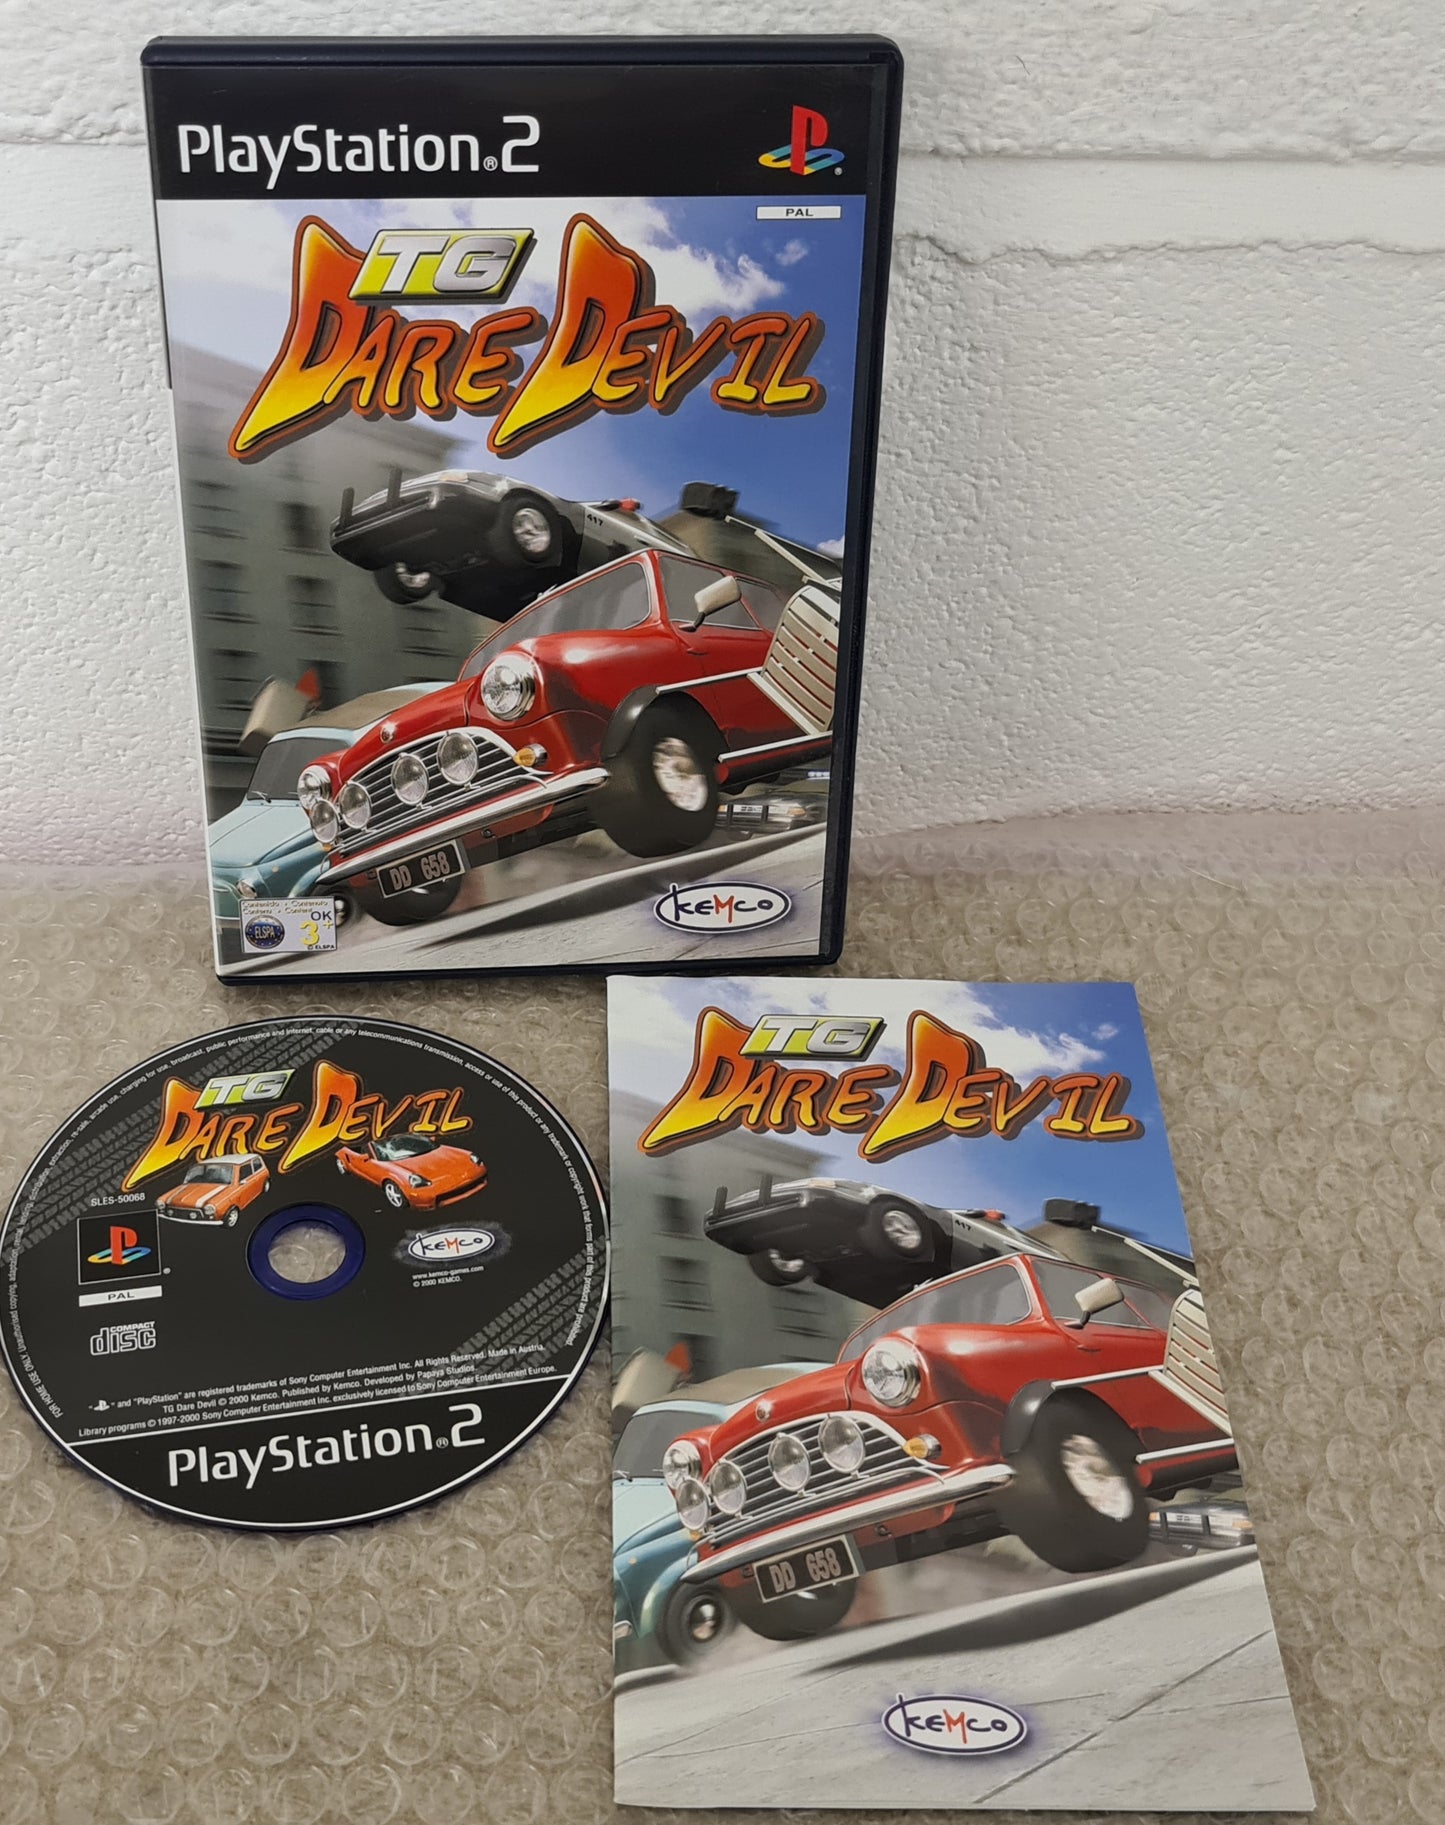 TG Dare Devil Sony Playstation 2 (PS2) Game